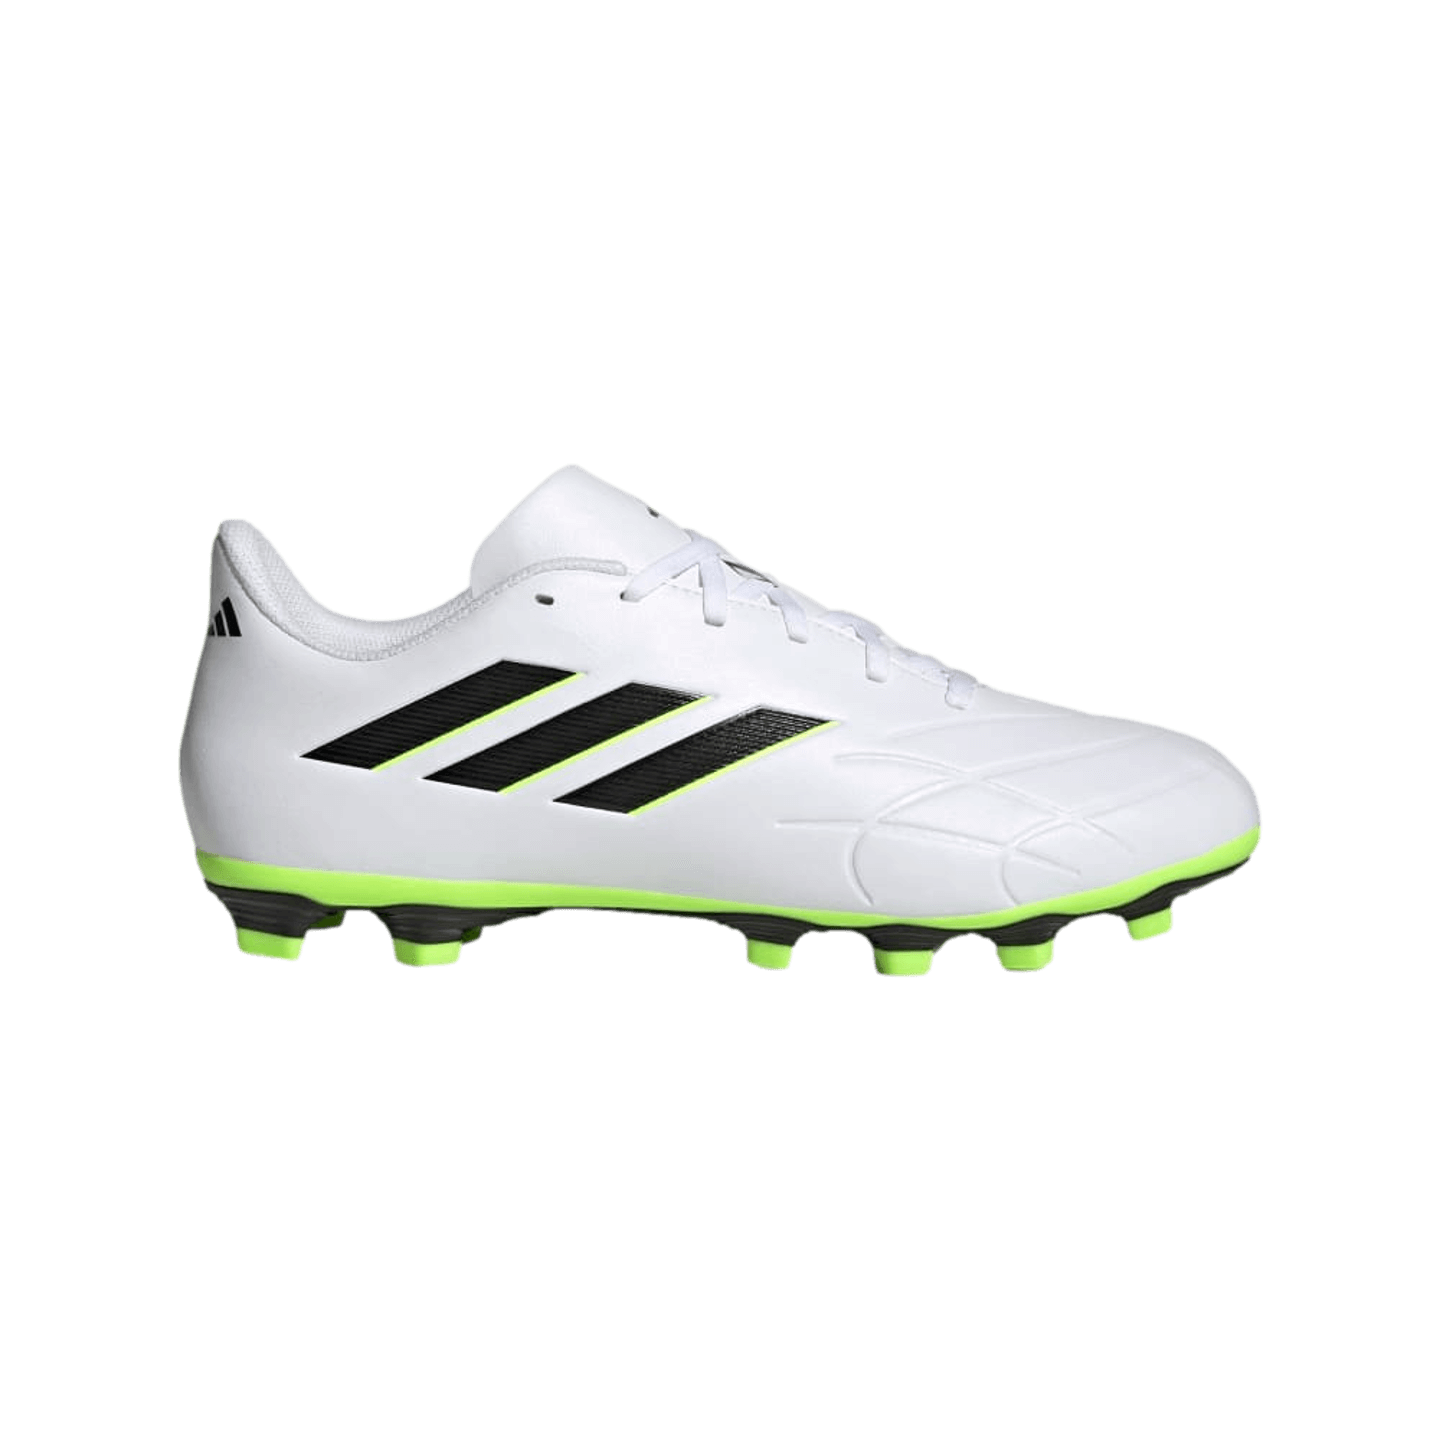 Adidas Copa Pure.4 Firm Ground Cleats